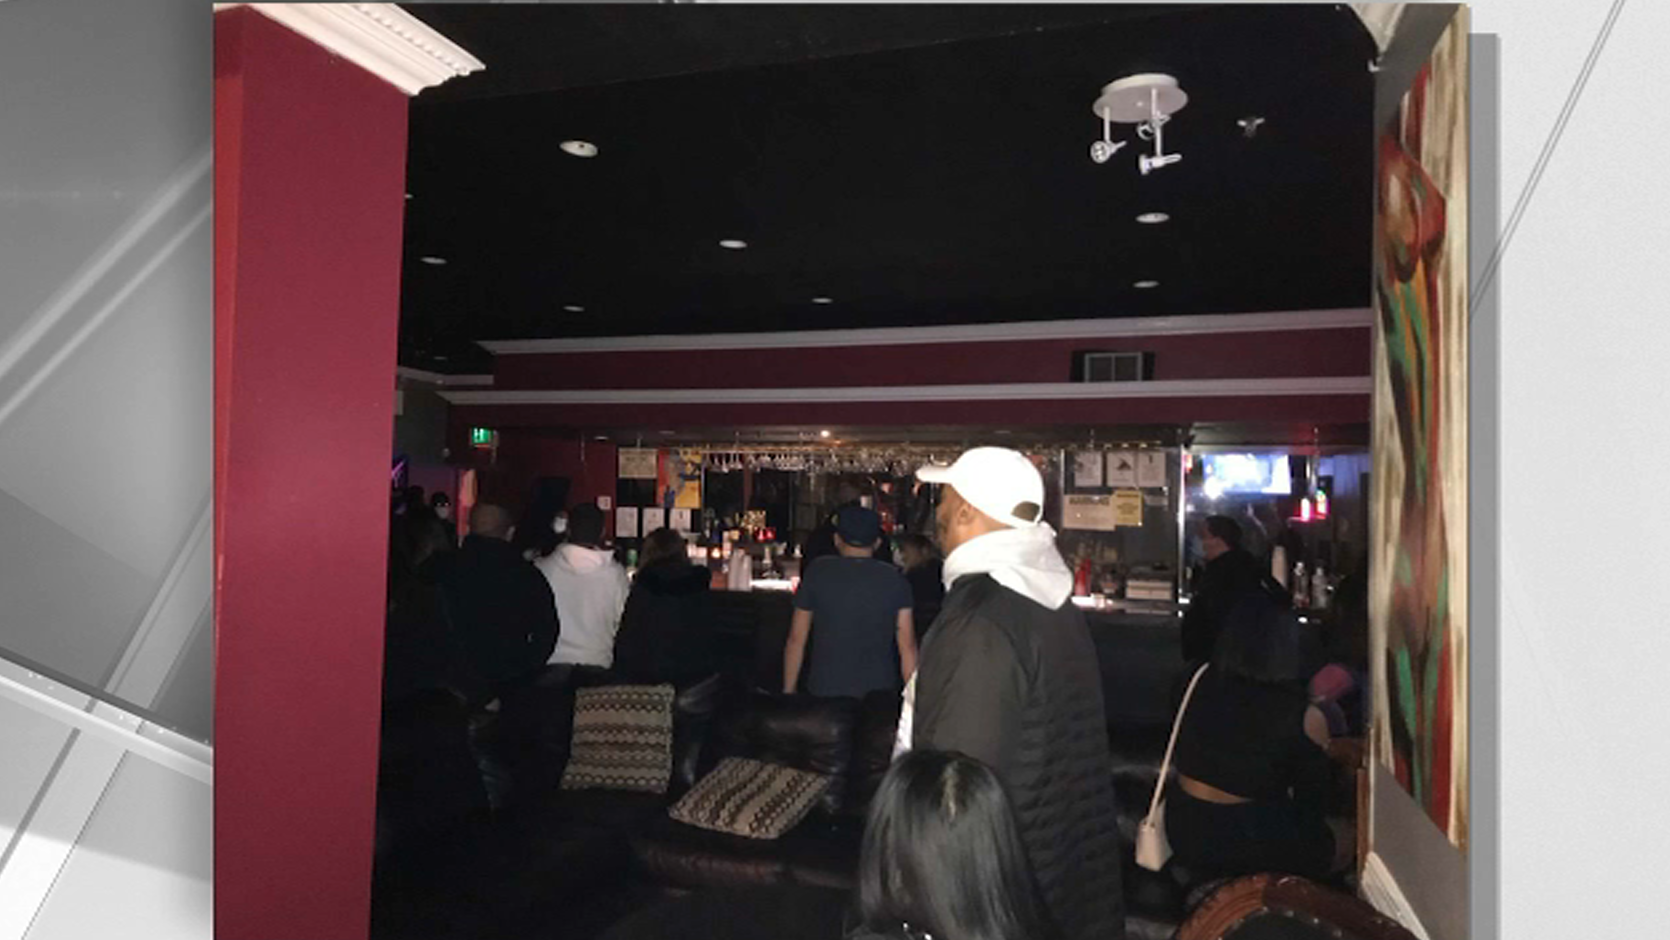 Swingers Club in Queens Latest Illicit Gathering Broken Up by NYC Sheriffs  photo